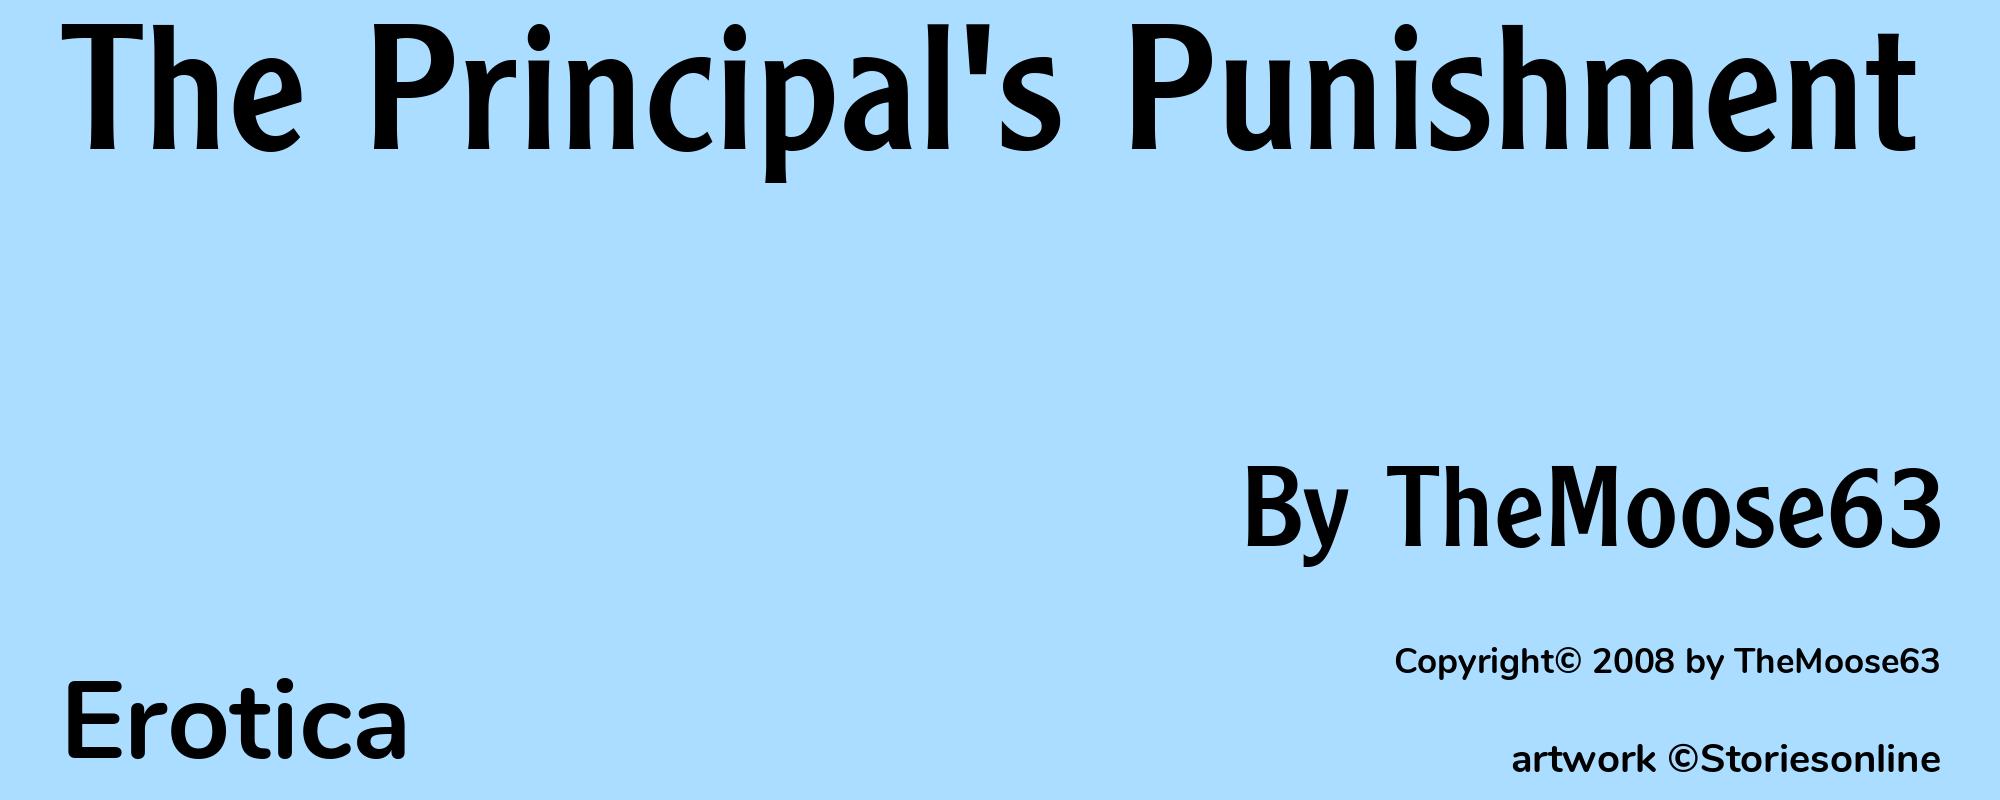 The Principal's Punishment - Cover